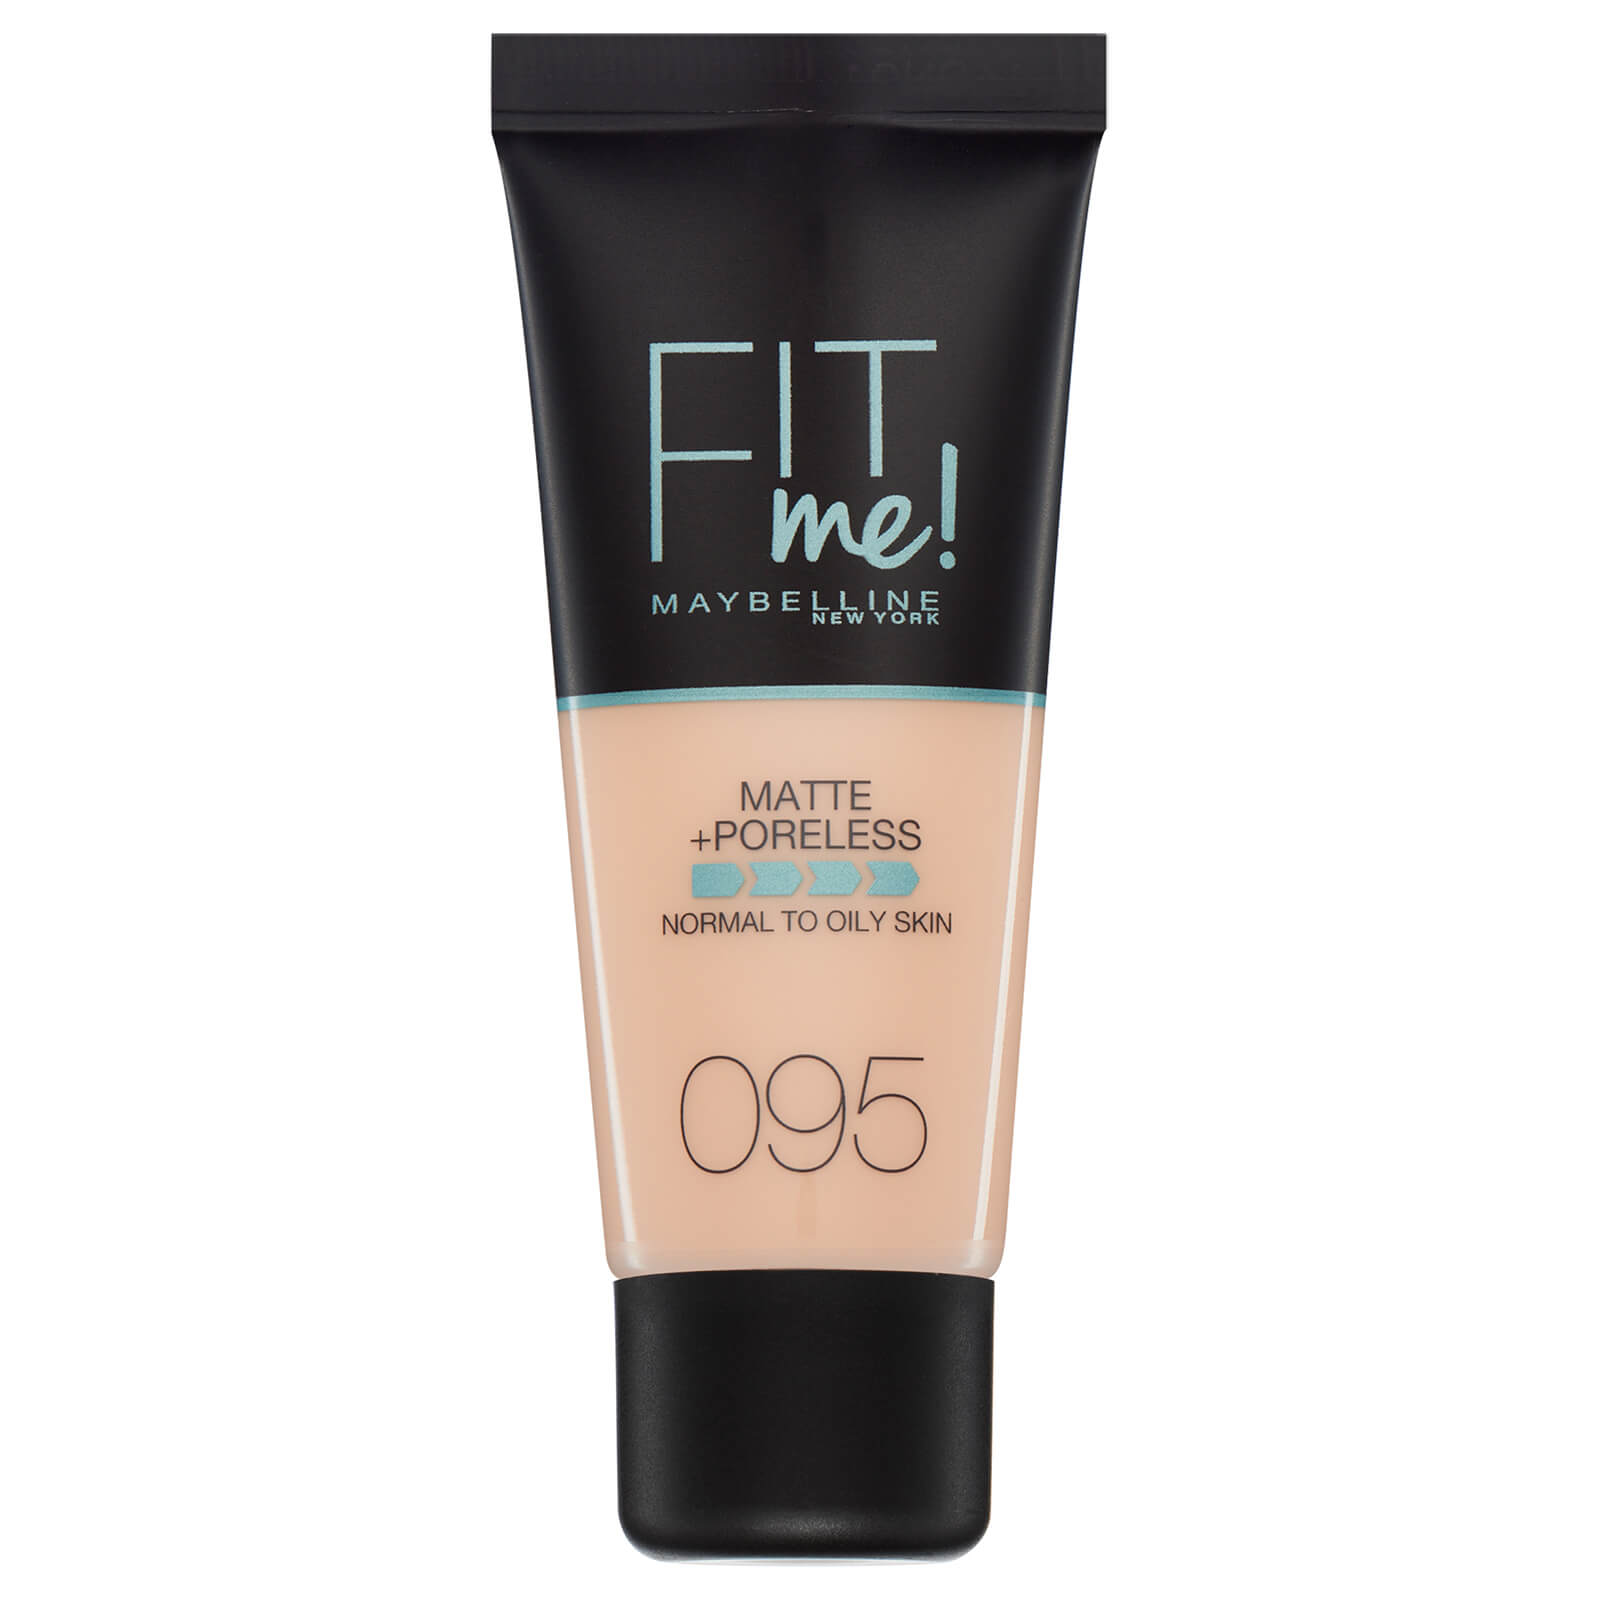 Maybelline Fit Me! Matte and Poreless Foundation 30ml (Various Shades) - 095 Fair Porcelain